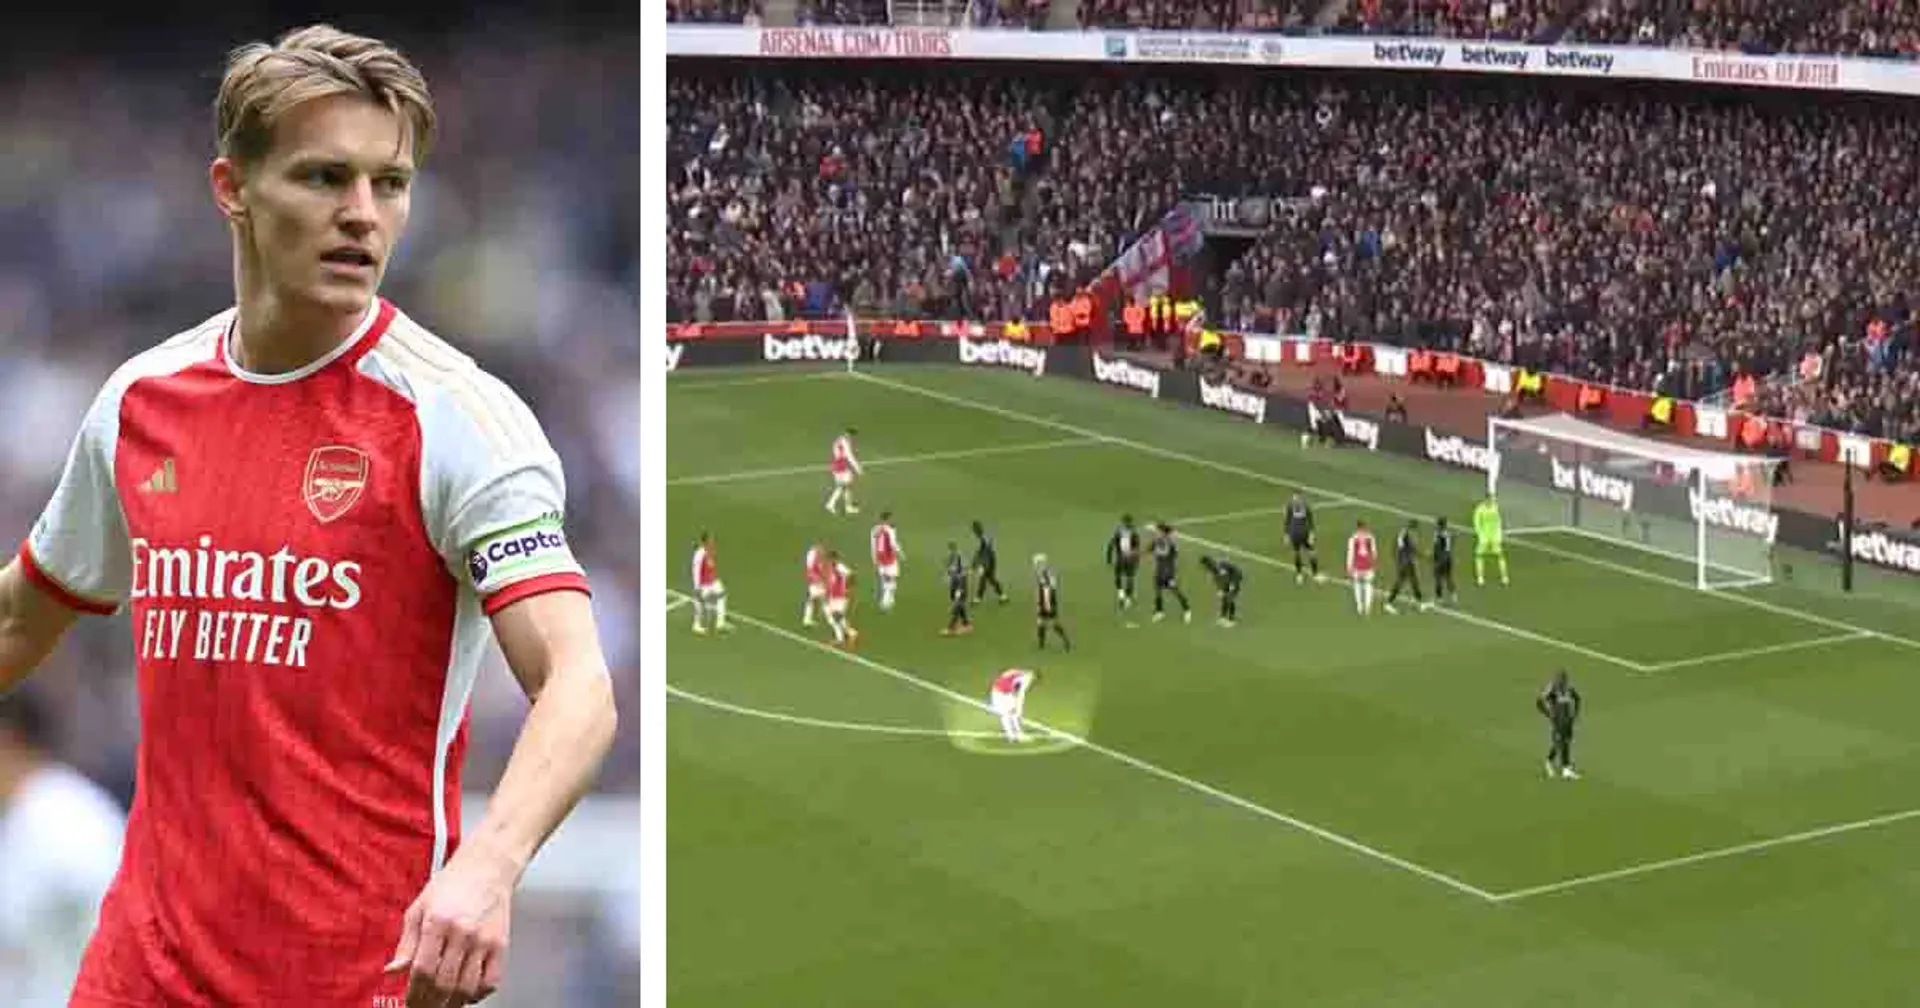 Revealed: The 'secret' behind Arsenal's innovative corner routine featuring Odegaard’s socks